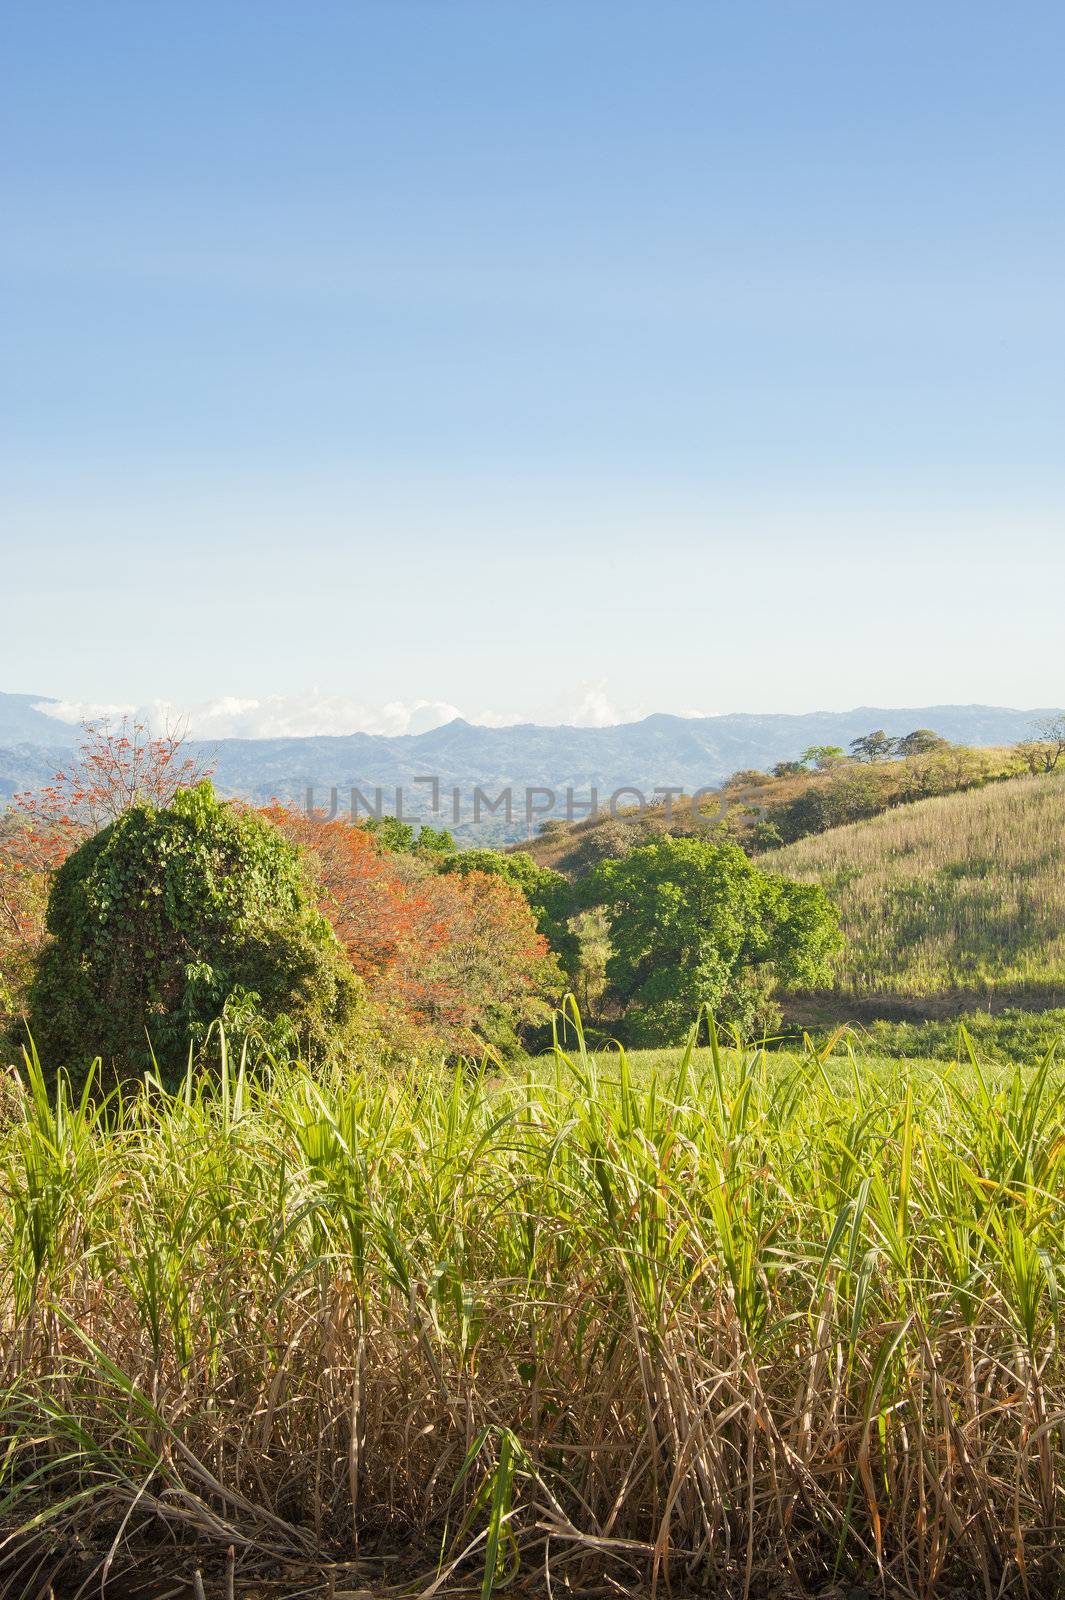 Field of mature sugar cane ready to be harvested in Costa Rica.